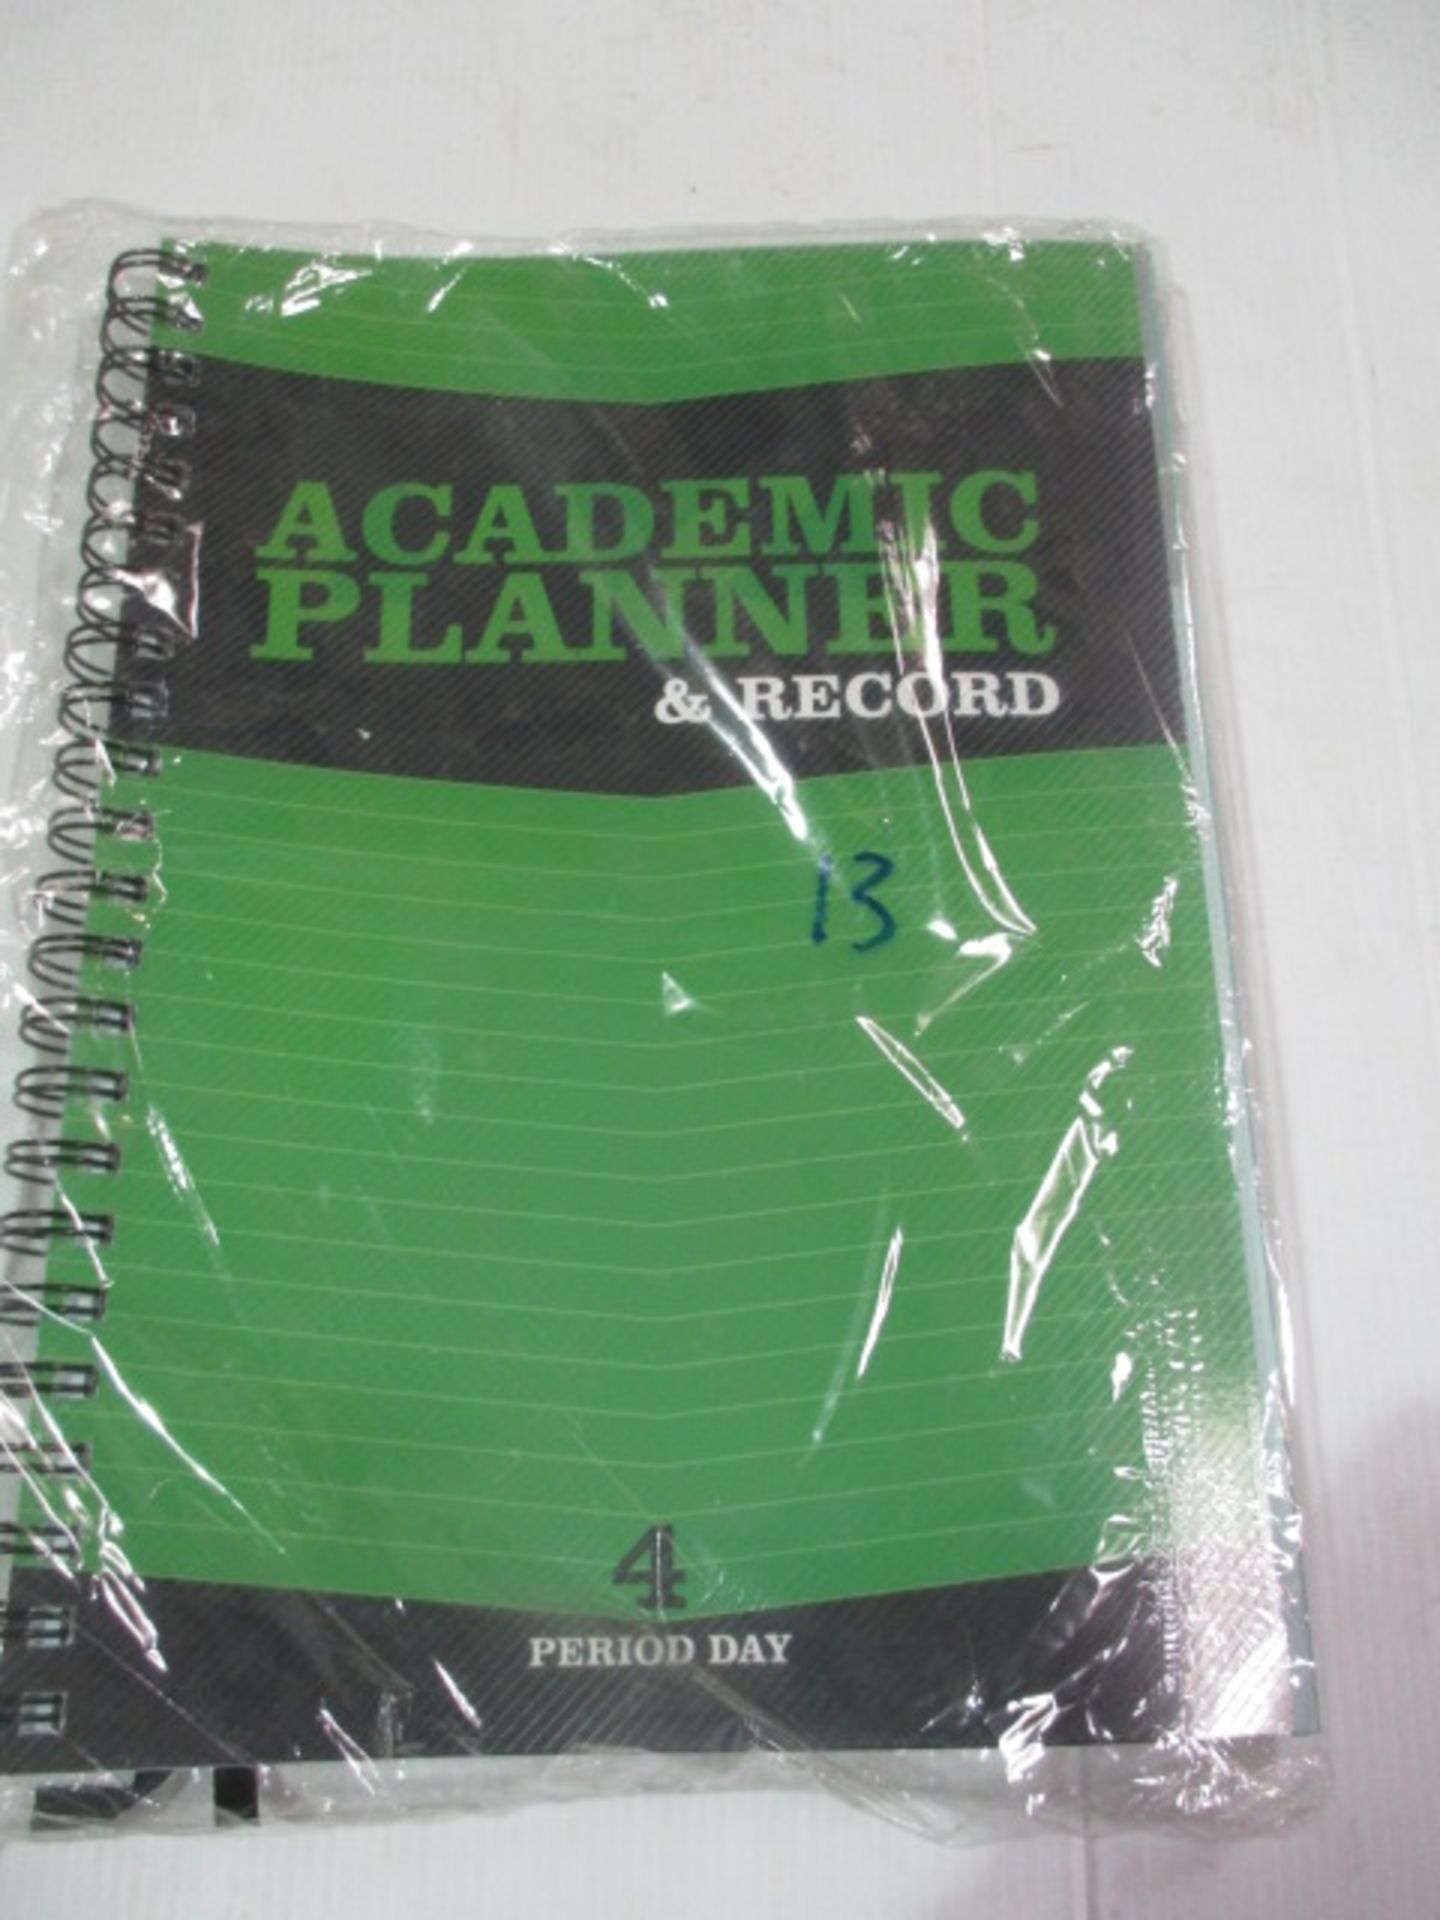 13pcs Academic planner thick folio bookl brand new factory sealed